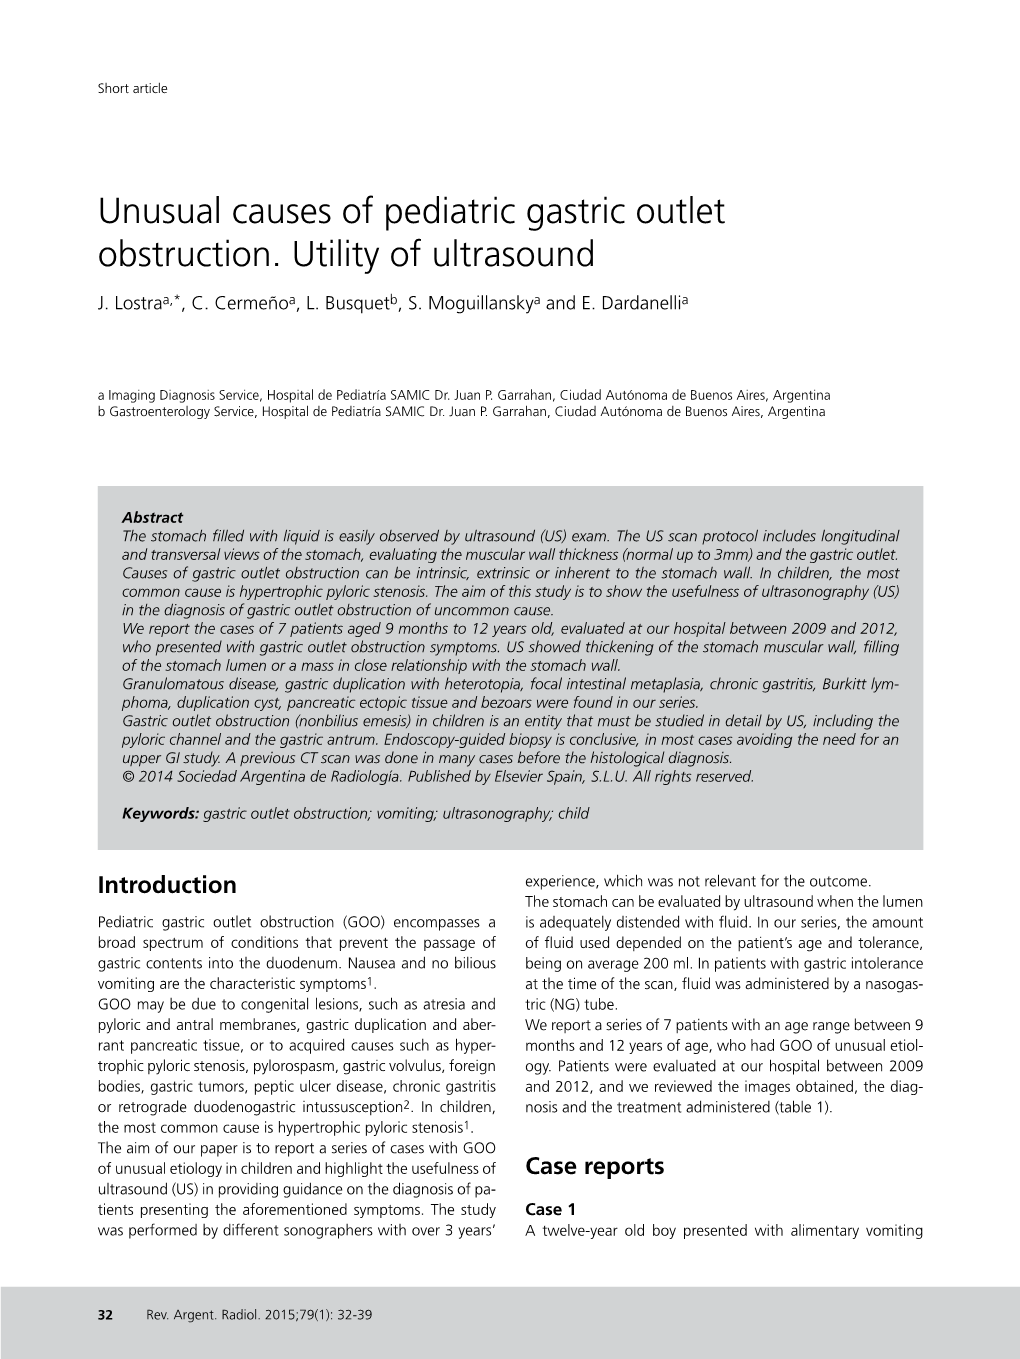 Unusual Causes of Pediatric Gastric Outlet Obstruction. Utility of Ultrasound